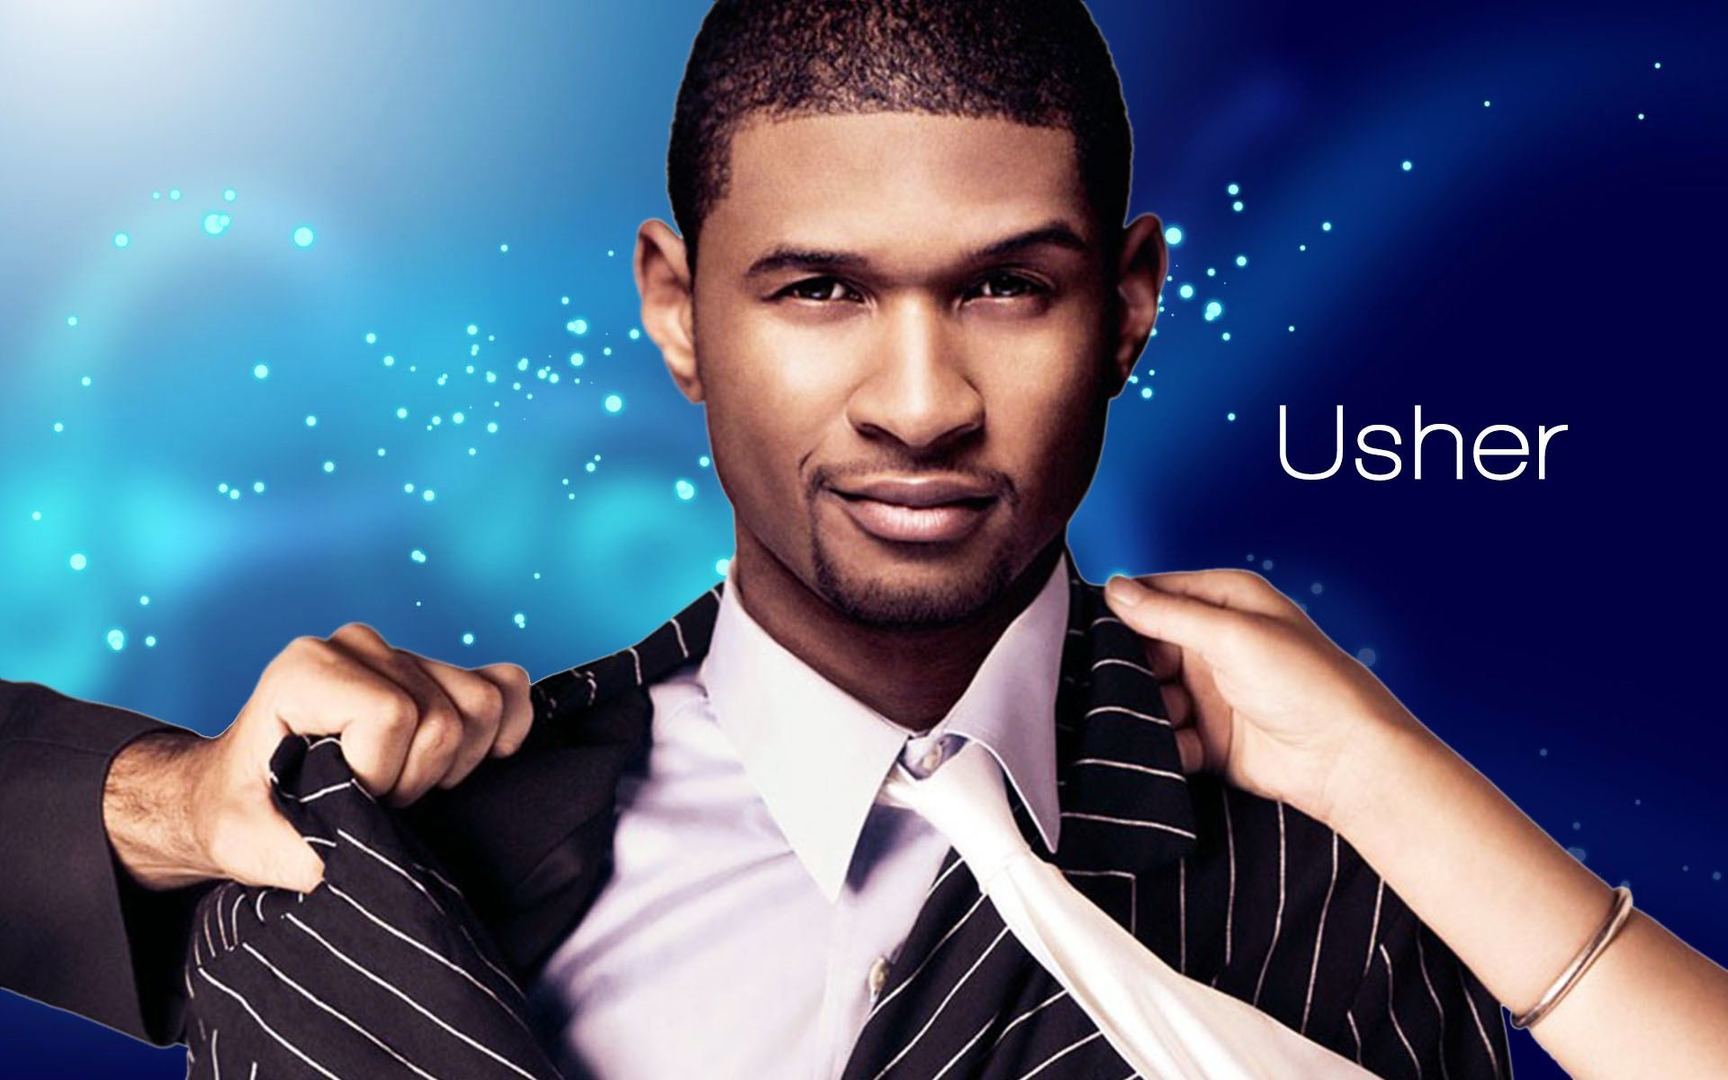 Usher Meaning and Definition